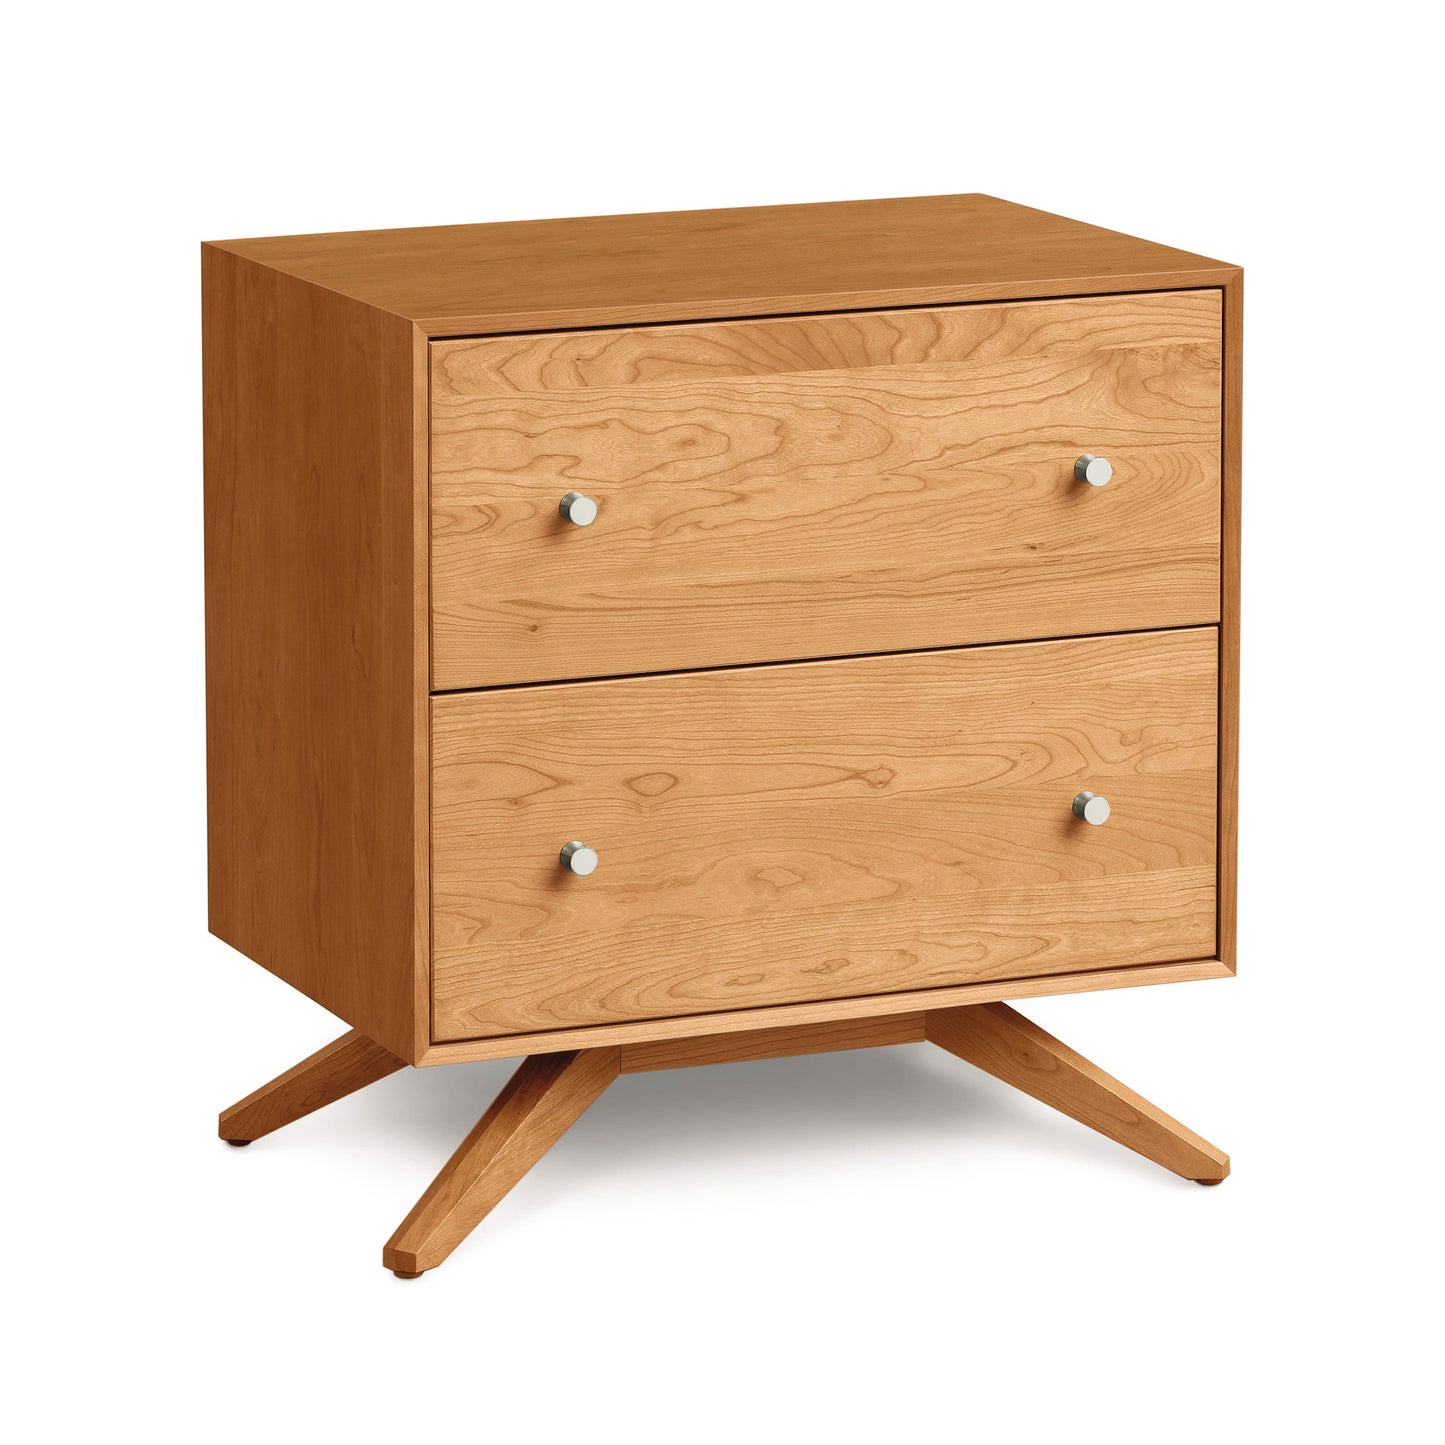 A contemporary Copeland Furniture Astrid 2-Drawer Nightstand with two drawers and splayed legs.